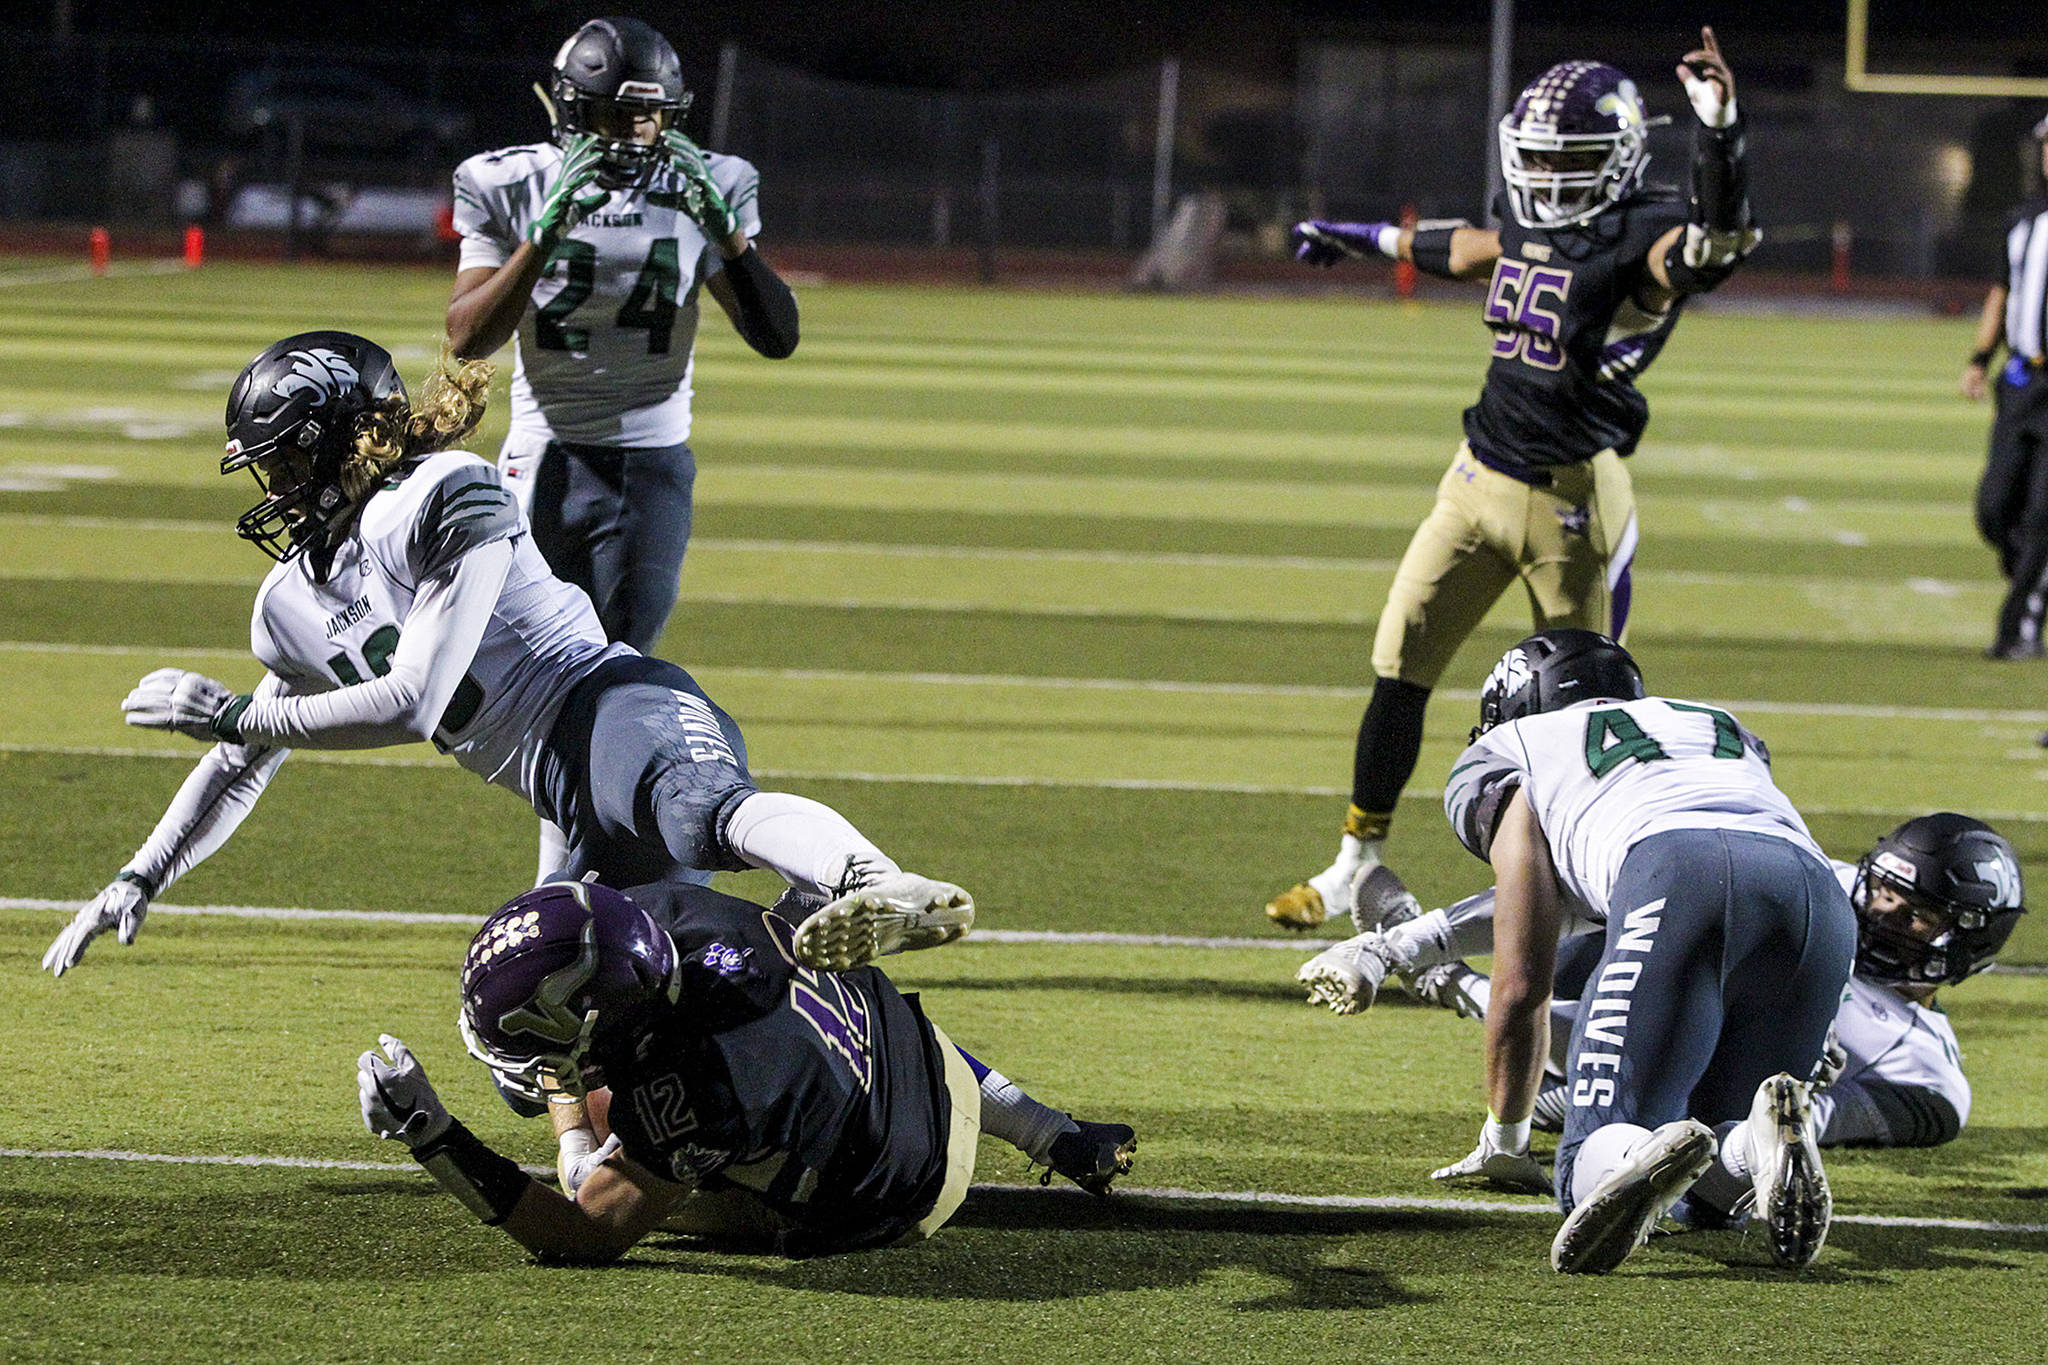 Lake Stevens’ Austin Murren (lower left) dives into the end zone for a touchdown in the first quarter of a game against Jackson on Sept. 29, 2017, at Lake Stevens High School. (Ian Terry / The Herald)